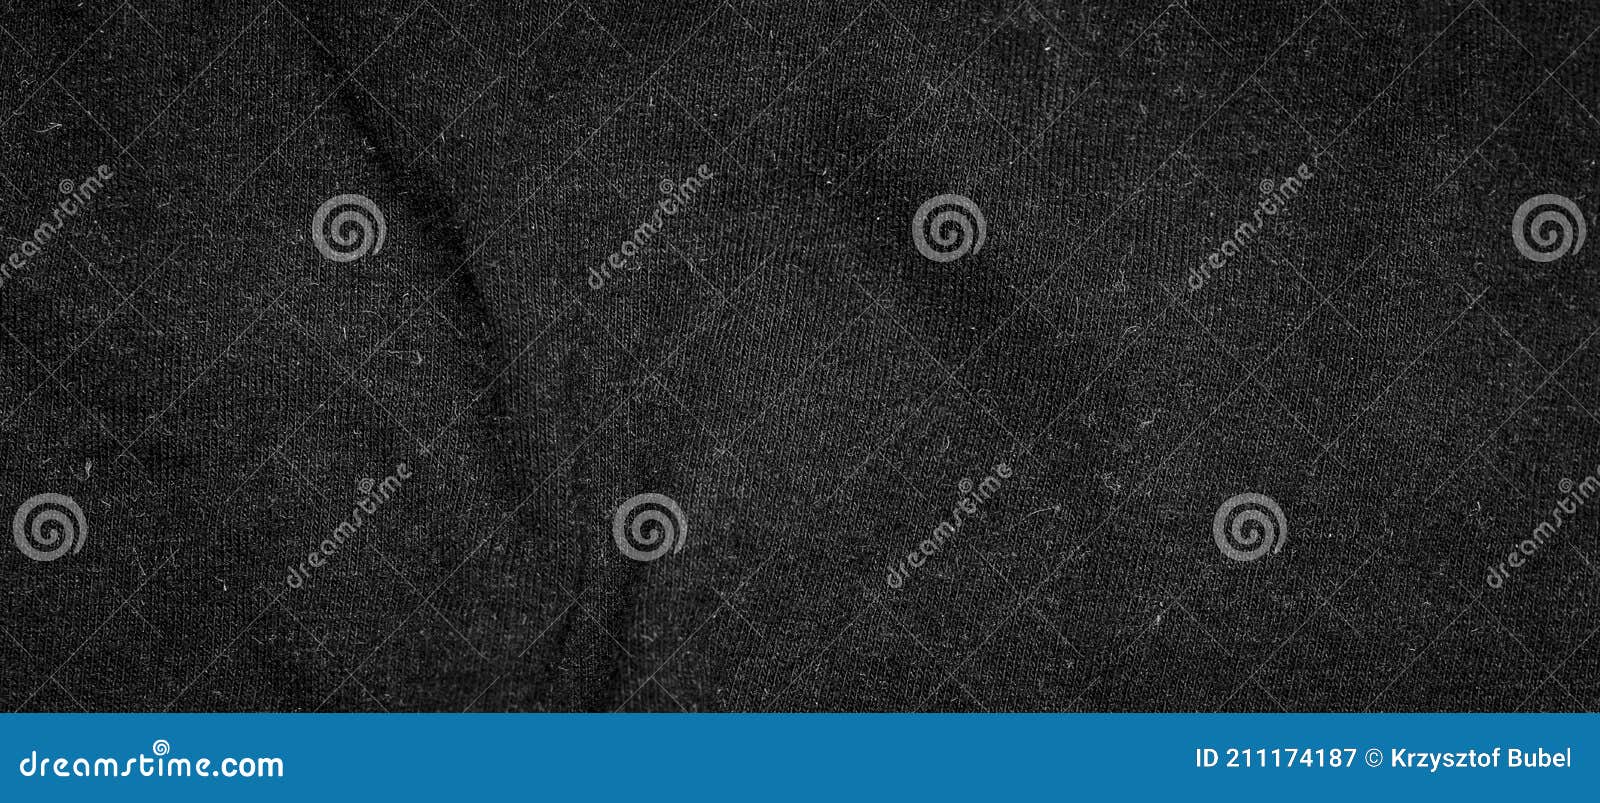 Black Crinkle Cotton Fabric with Visible Details. Background Stock ...